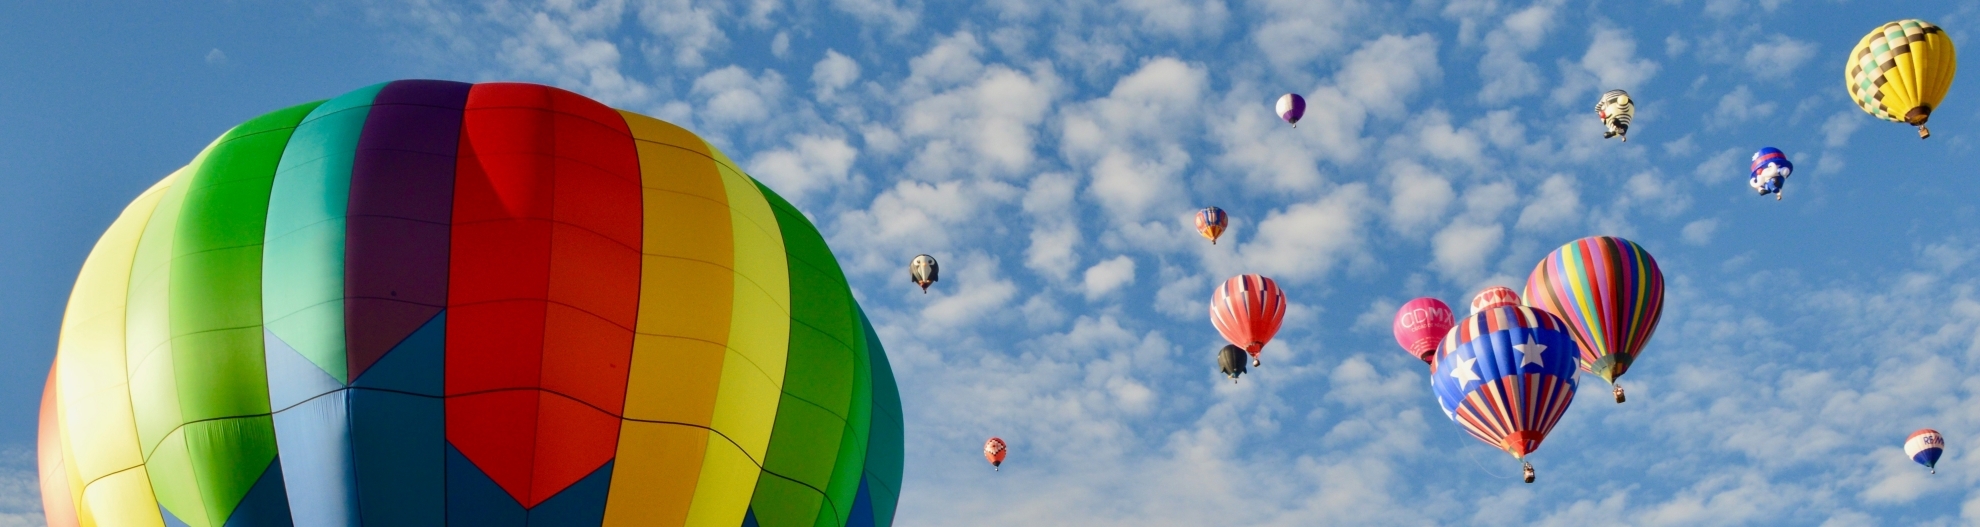 hot air balloons against a blue sky with few clouds